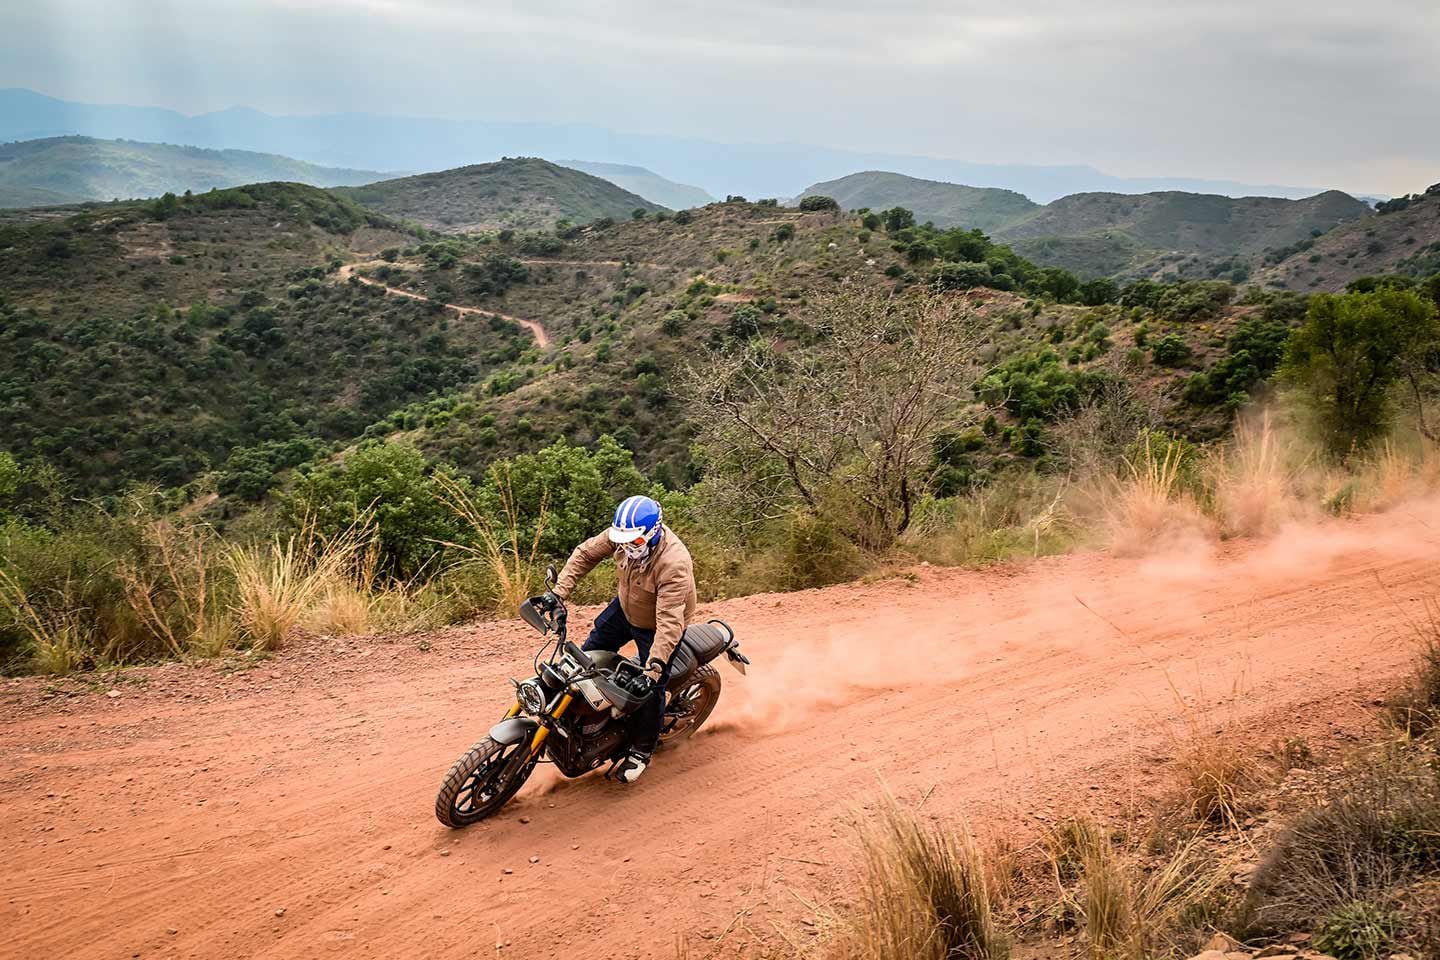 The Scrambler 400 X will get you down a dirt mountain road without any issue.